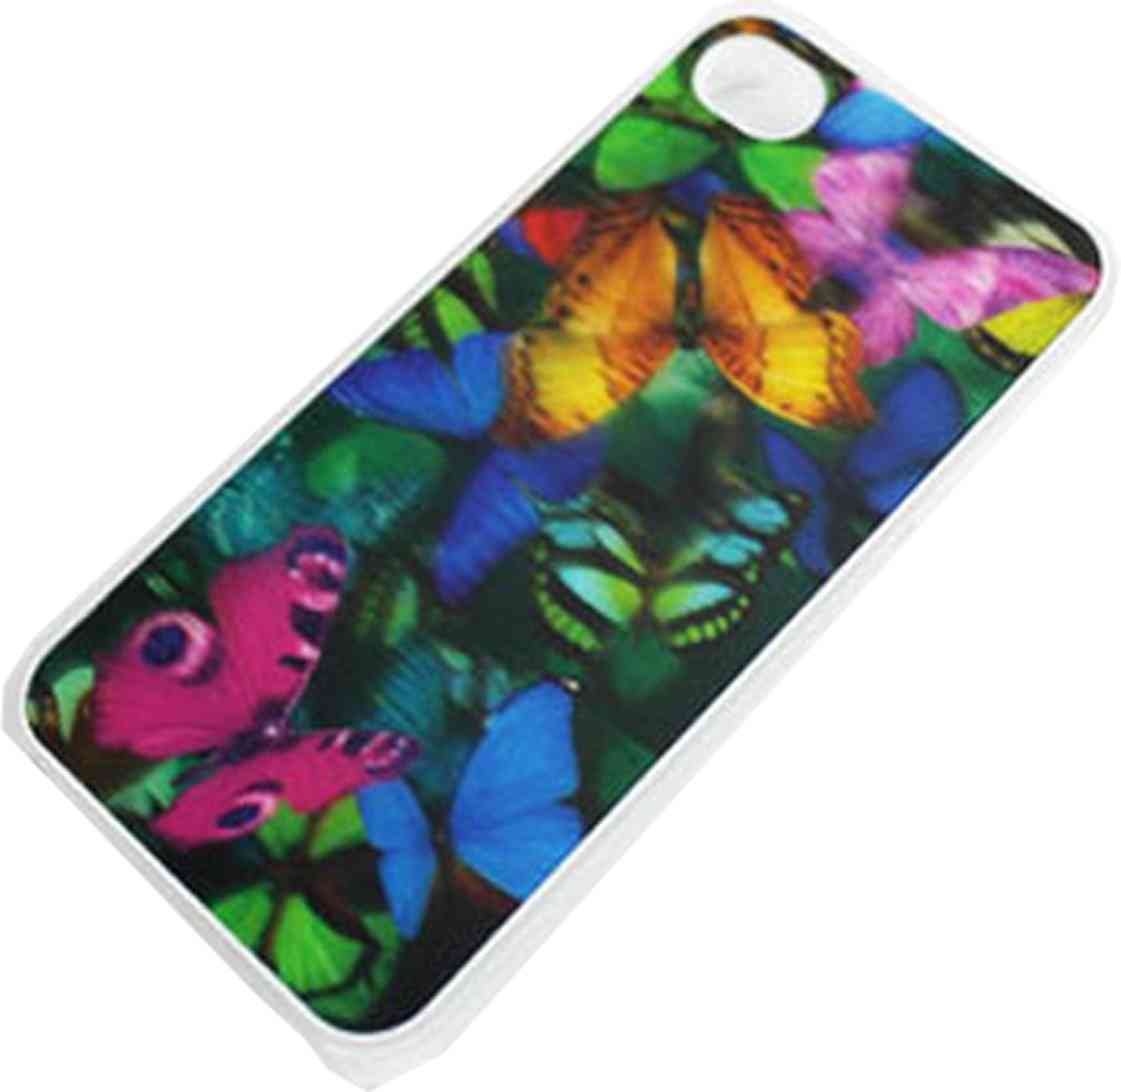 Carcasa Iphone 4 Y 4s 3d Case Butterfly